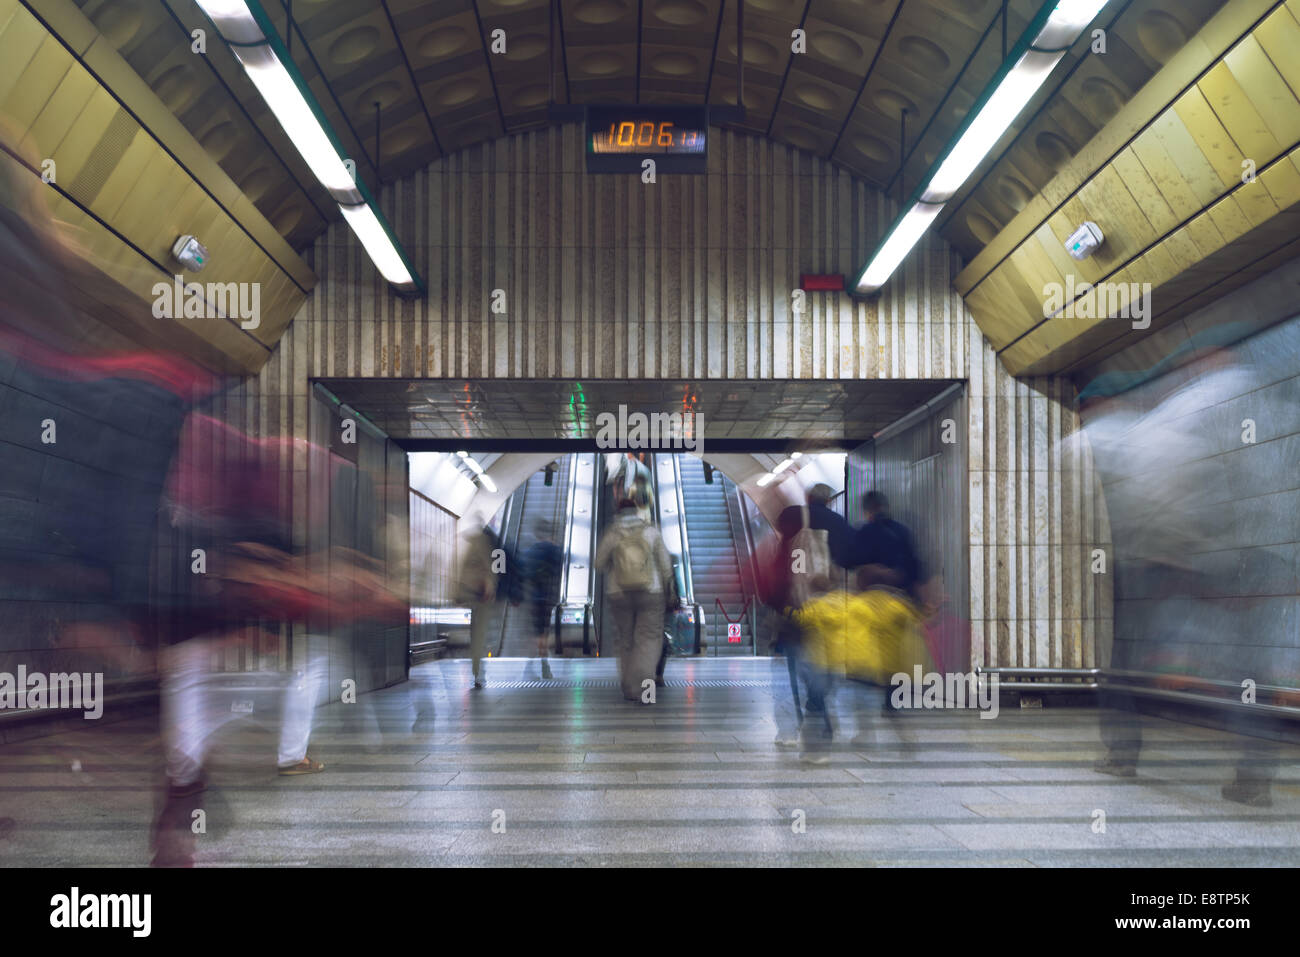 fast moving people at subway train station, long exposure image Stock Photo